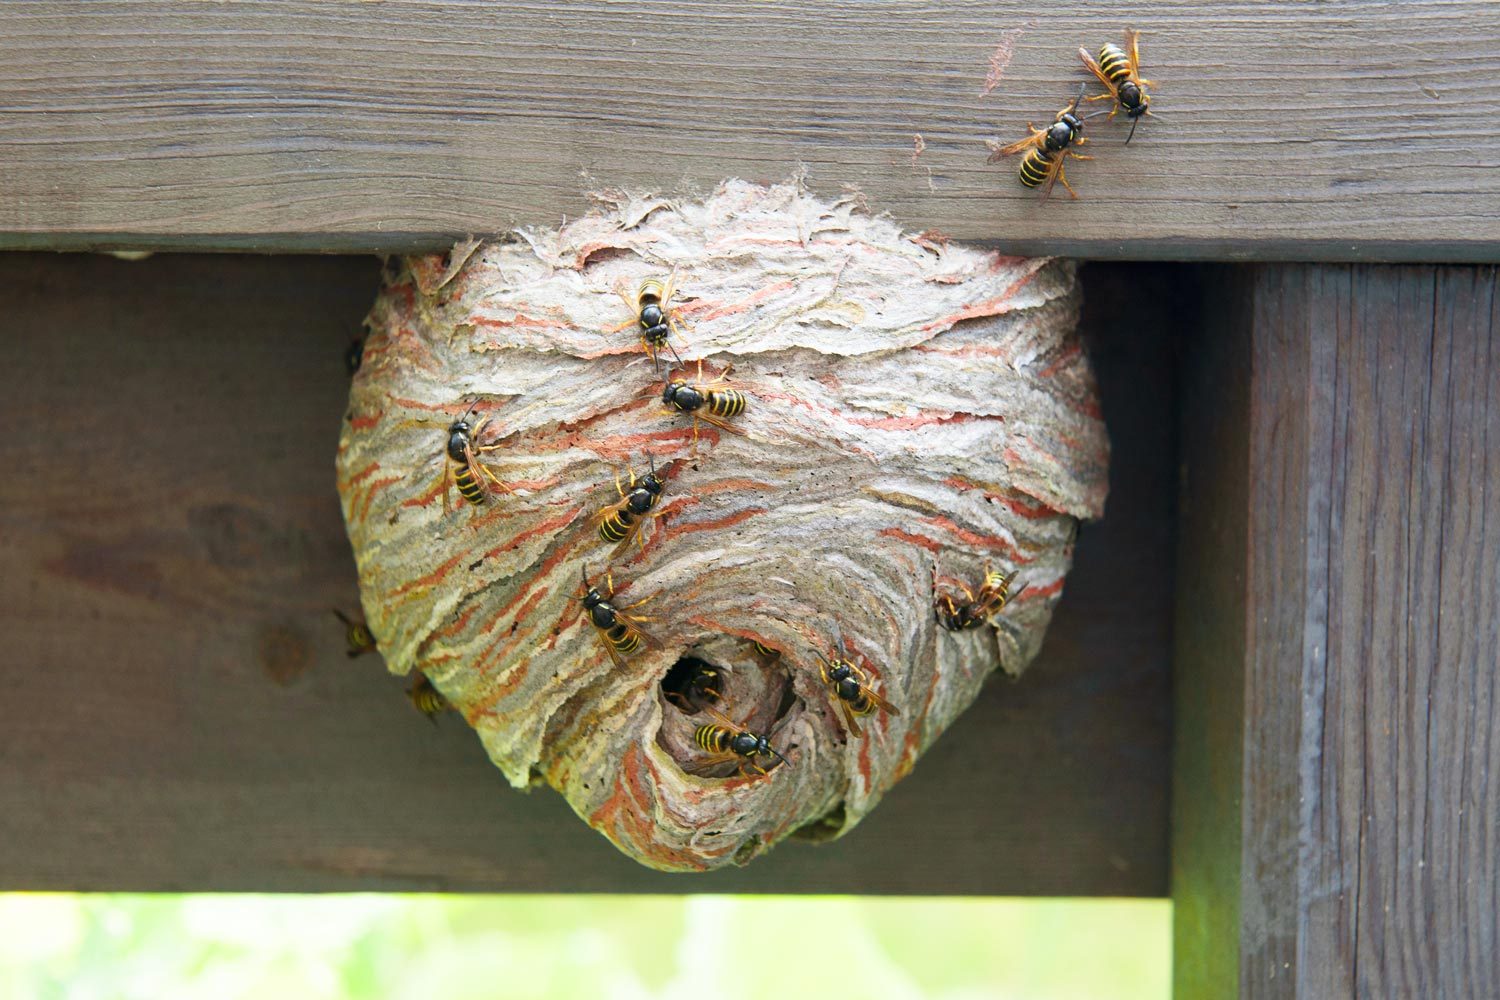 Wasp Nest on a wooden porch ledge with yellow and black wasps entering and exiting the nest onto the wood against a green background